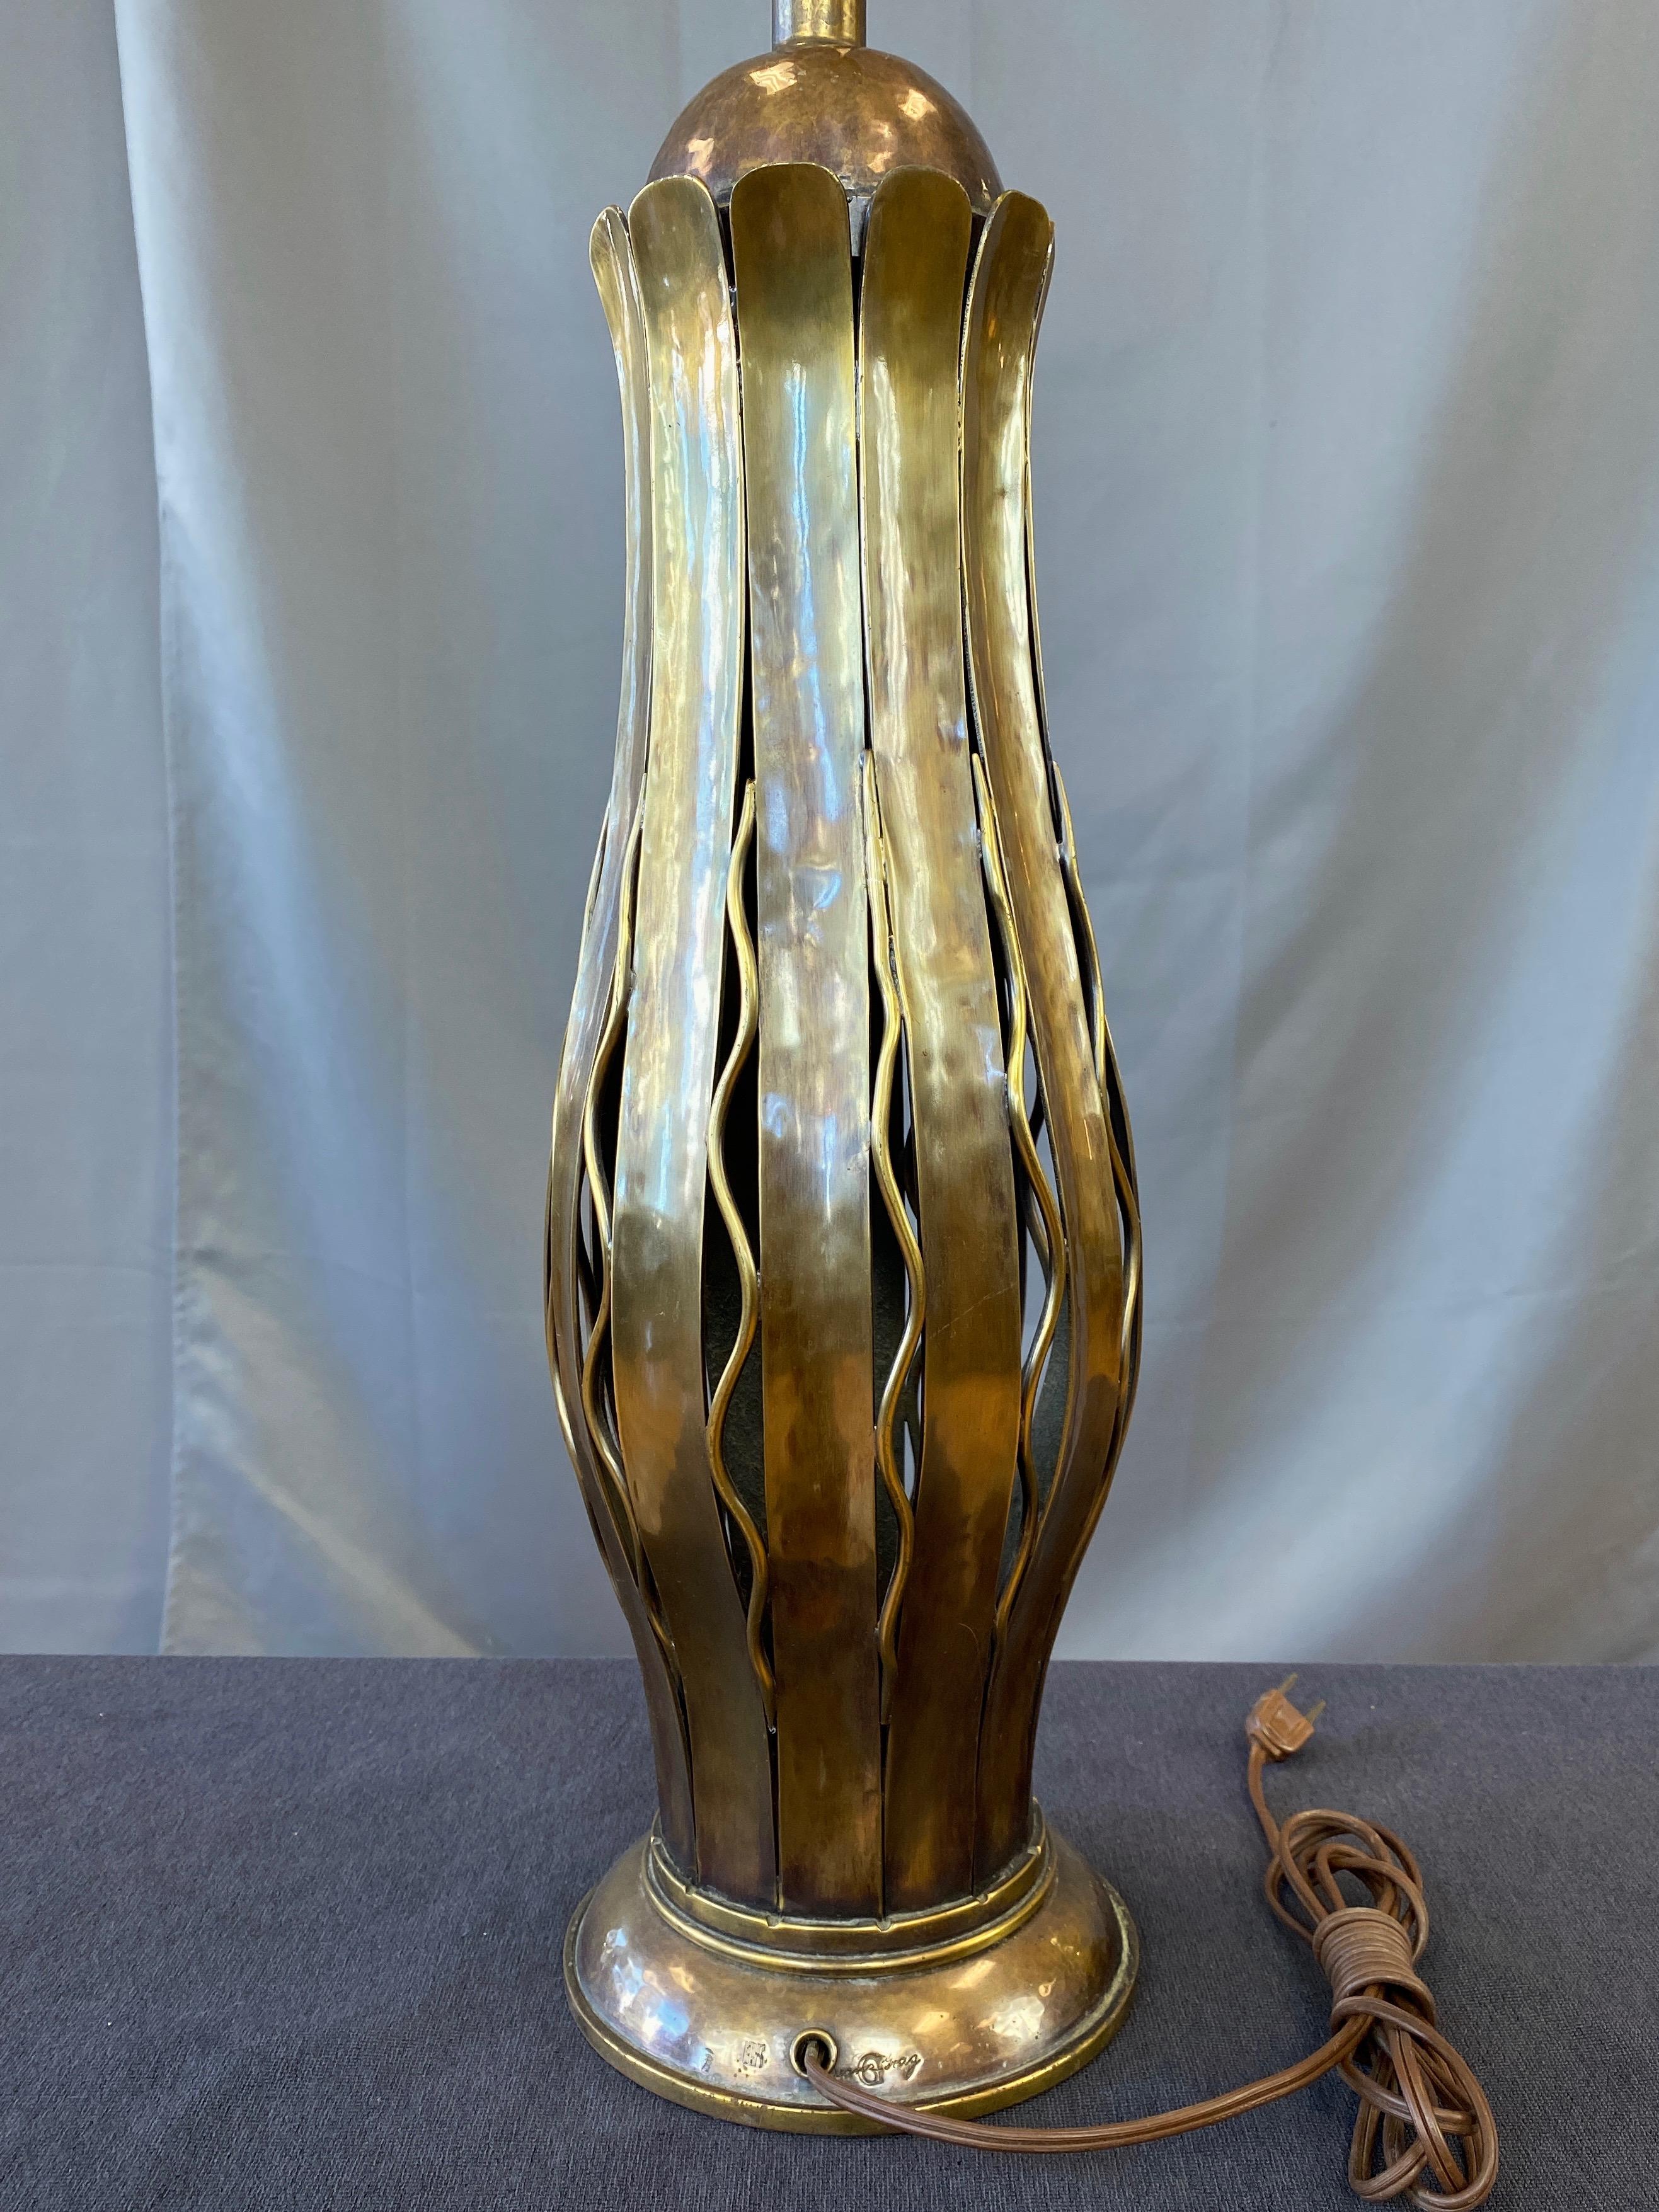 Hans Grag for Gump’s Hammered Copper and Brass Table Lamp, 1950s For Sale 6